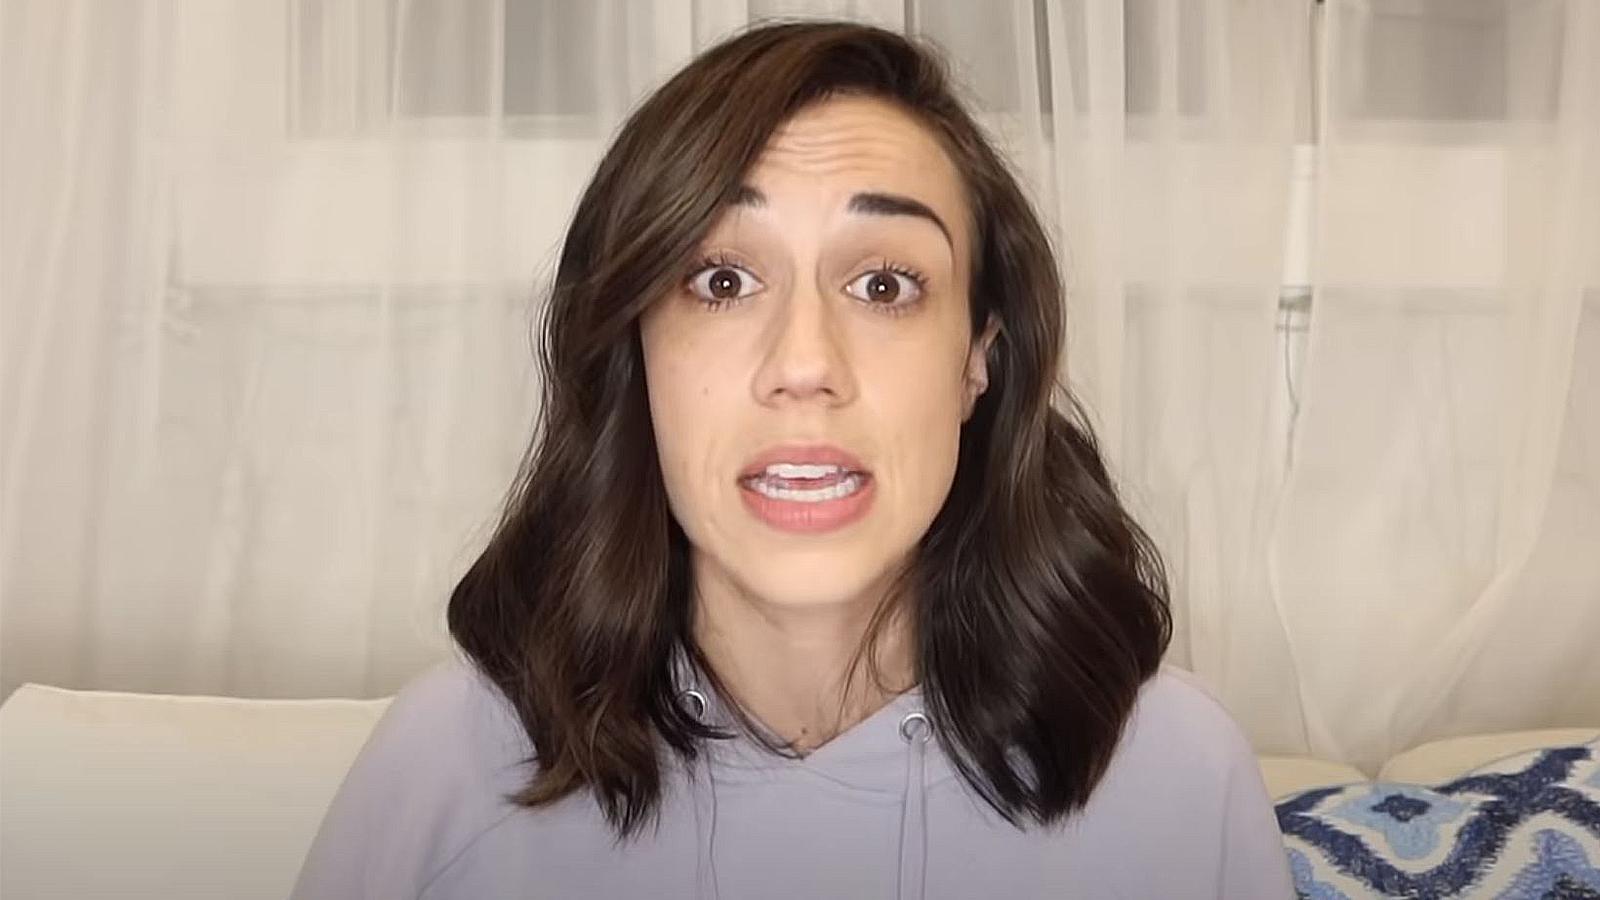 Colleen Ballinger addresses “creepy” accusations from 17-year-old fan ...